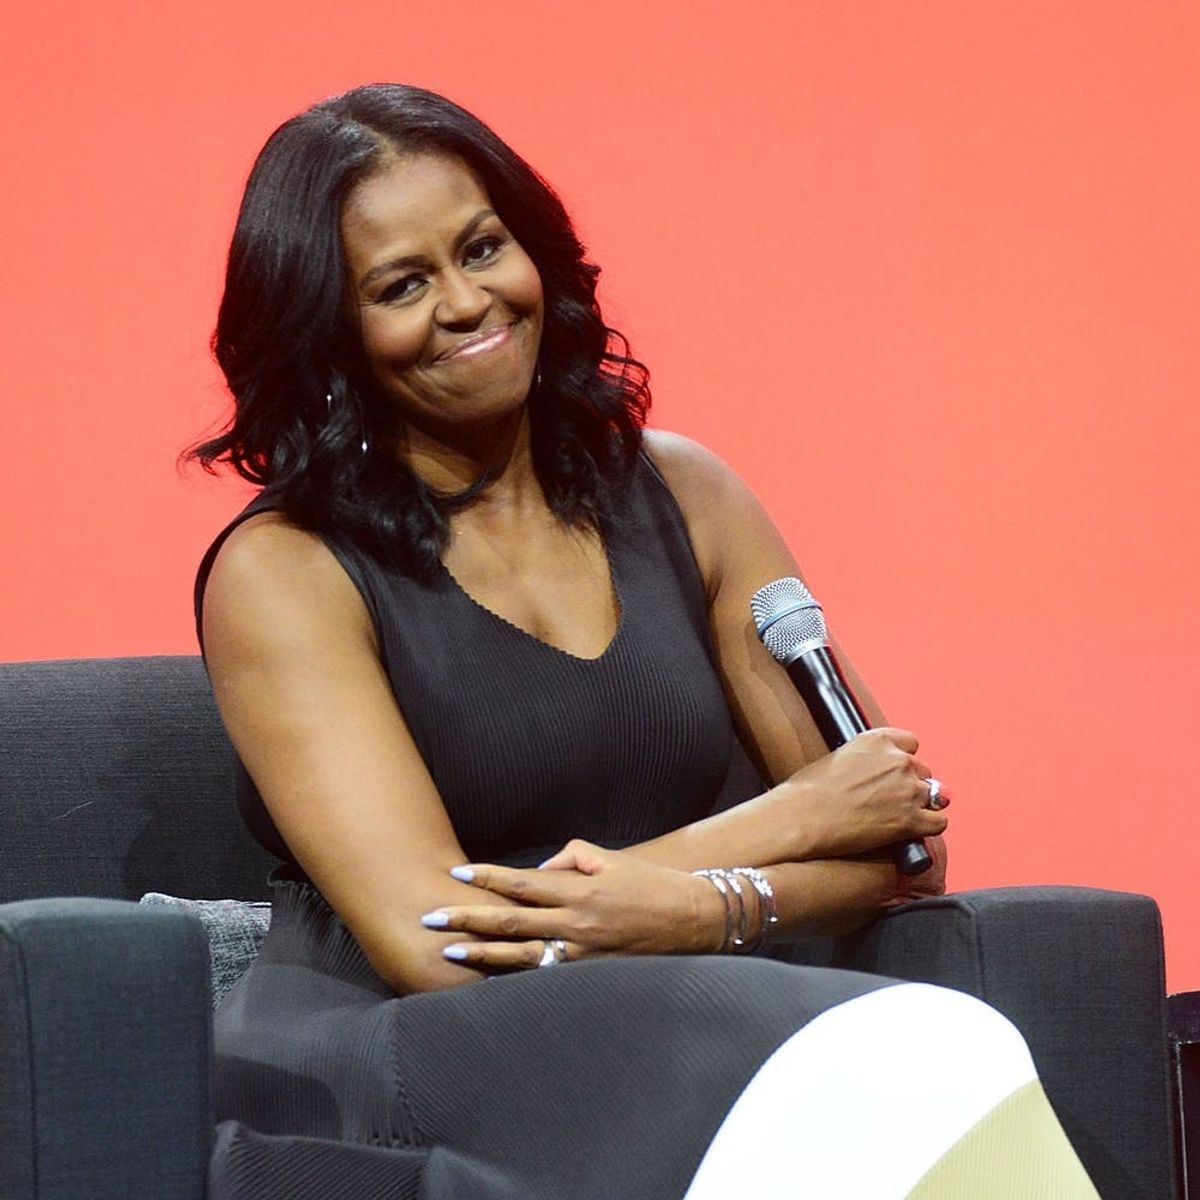 We Found Michelle Obama’s One-Shouldered Top from Her Italian Vacation